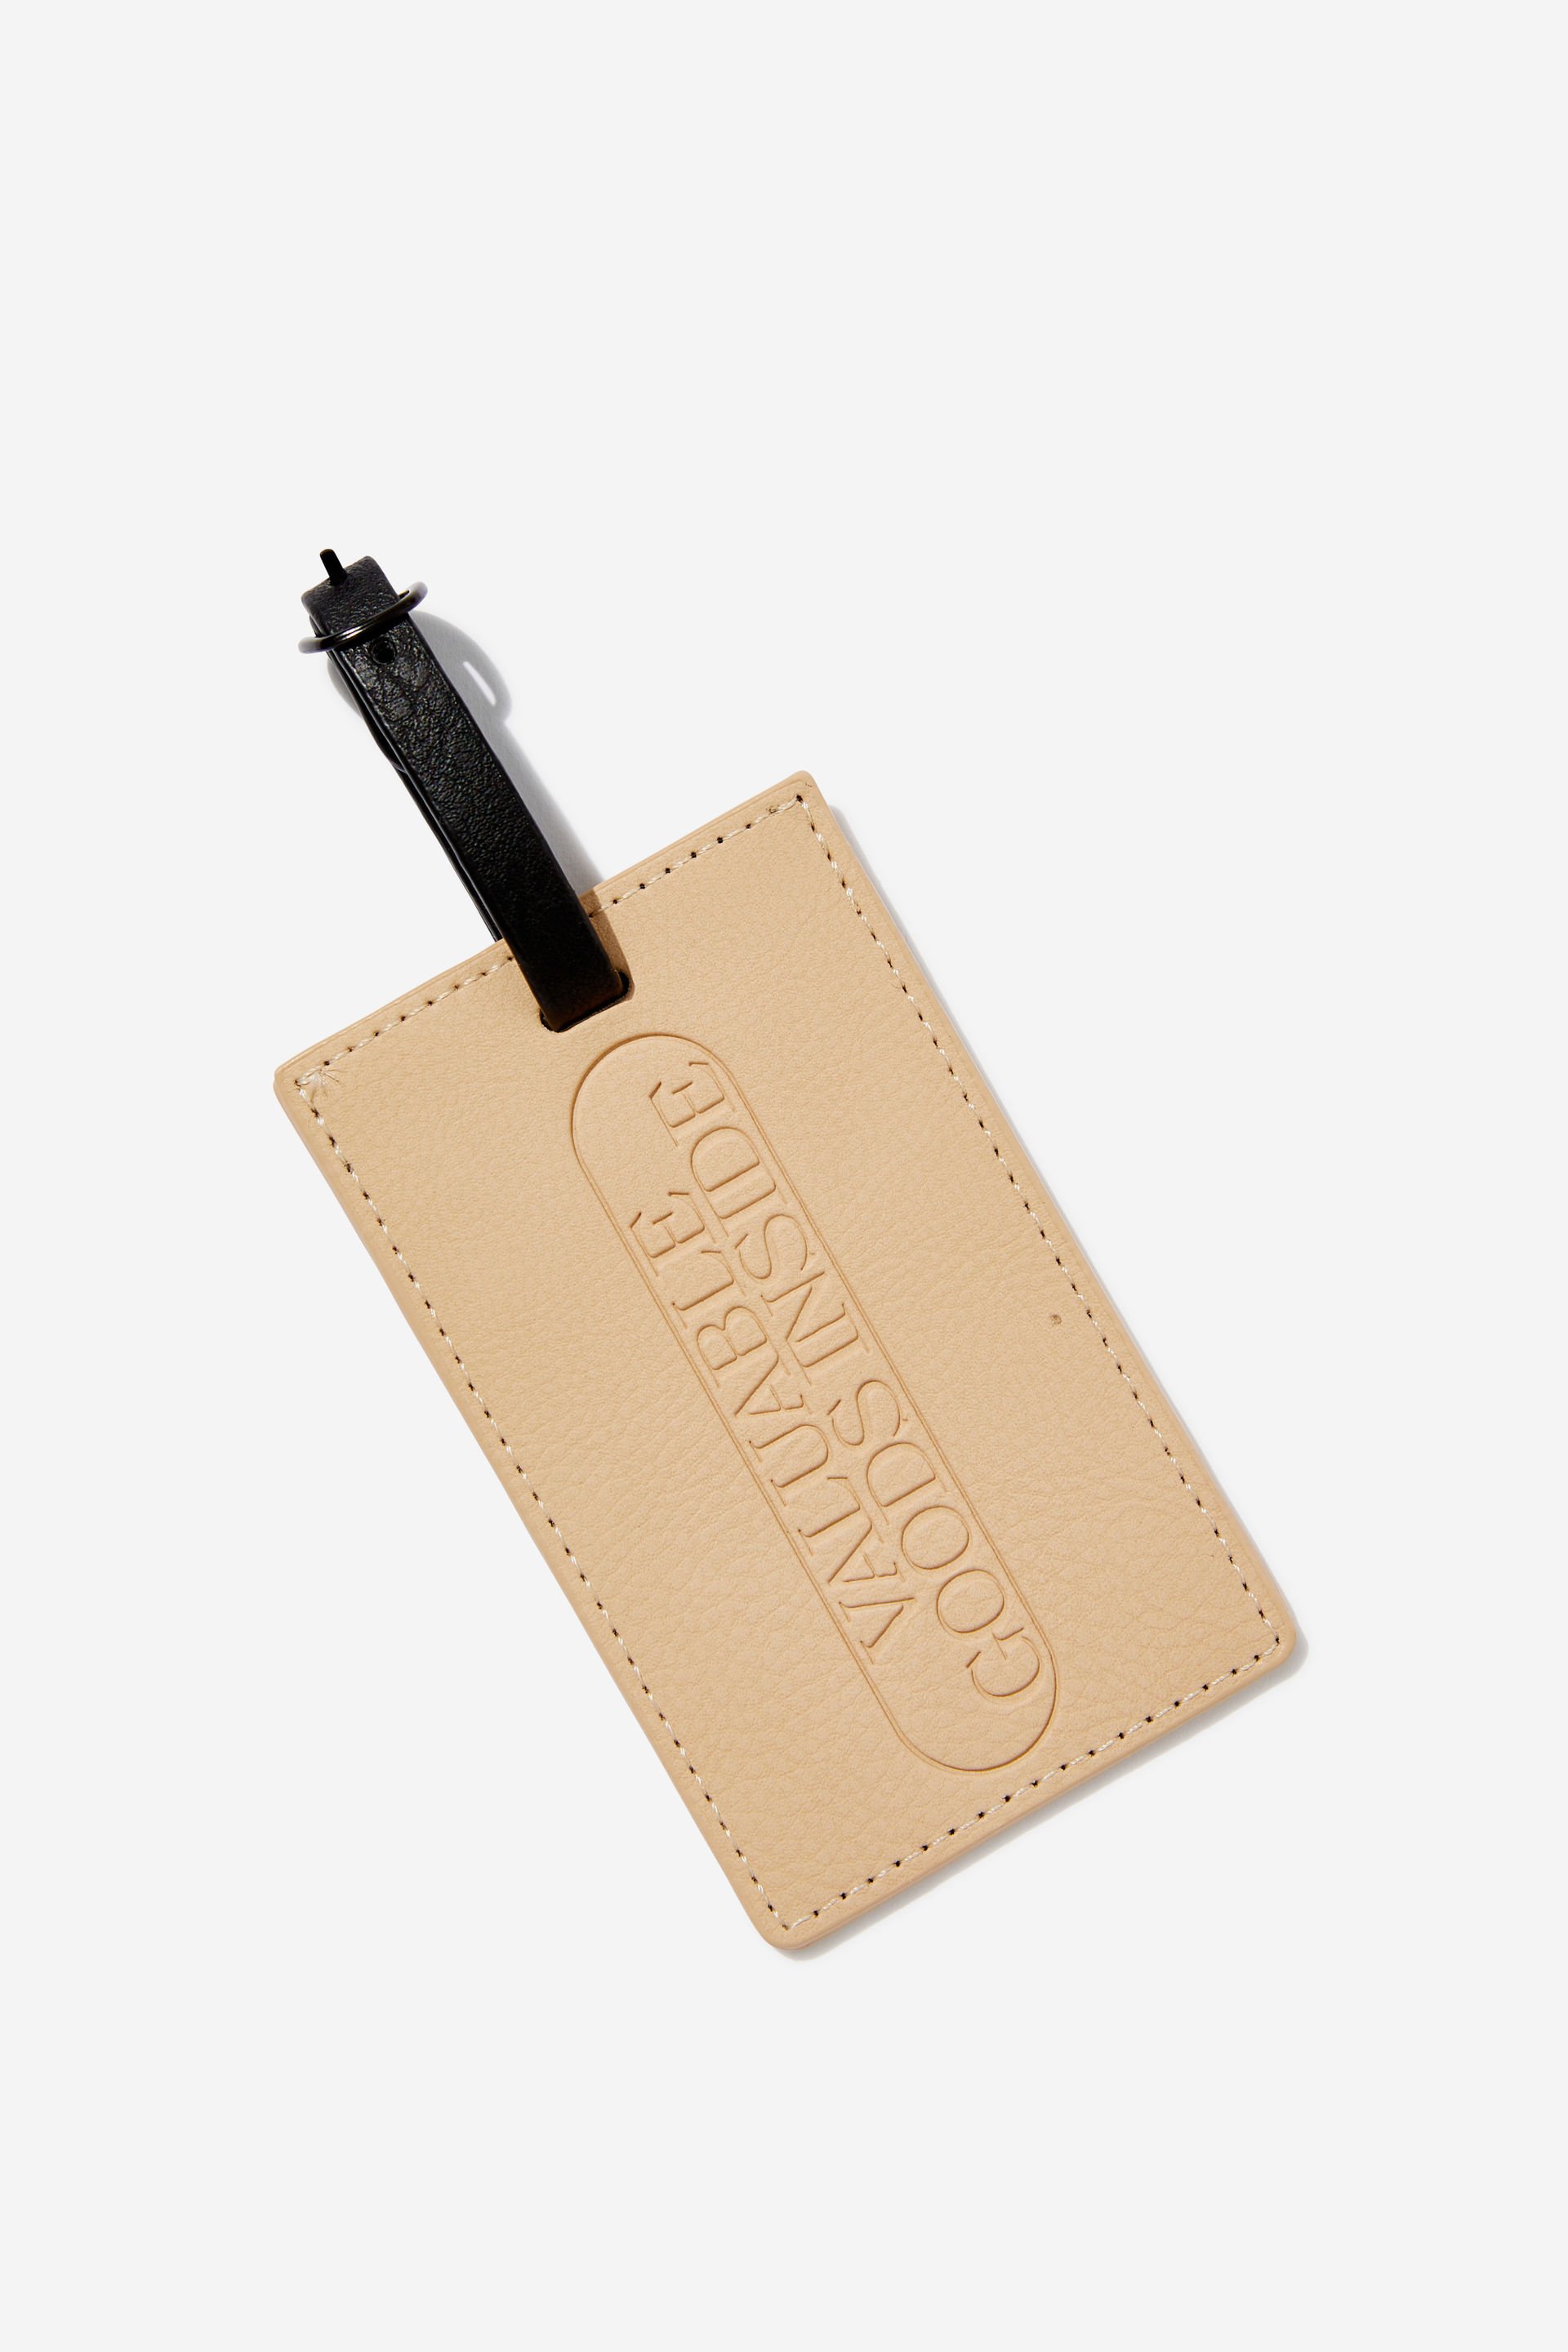 Typo - Off The Grid Luggage Tag - Valuable goods/ latte